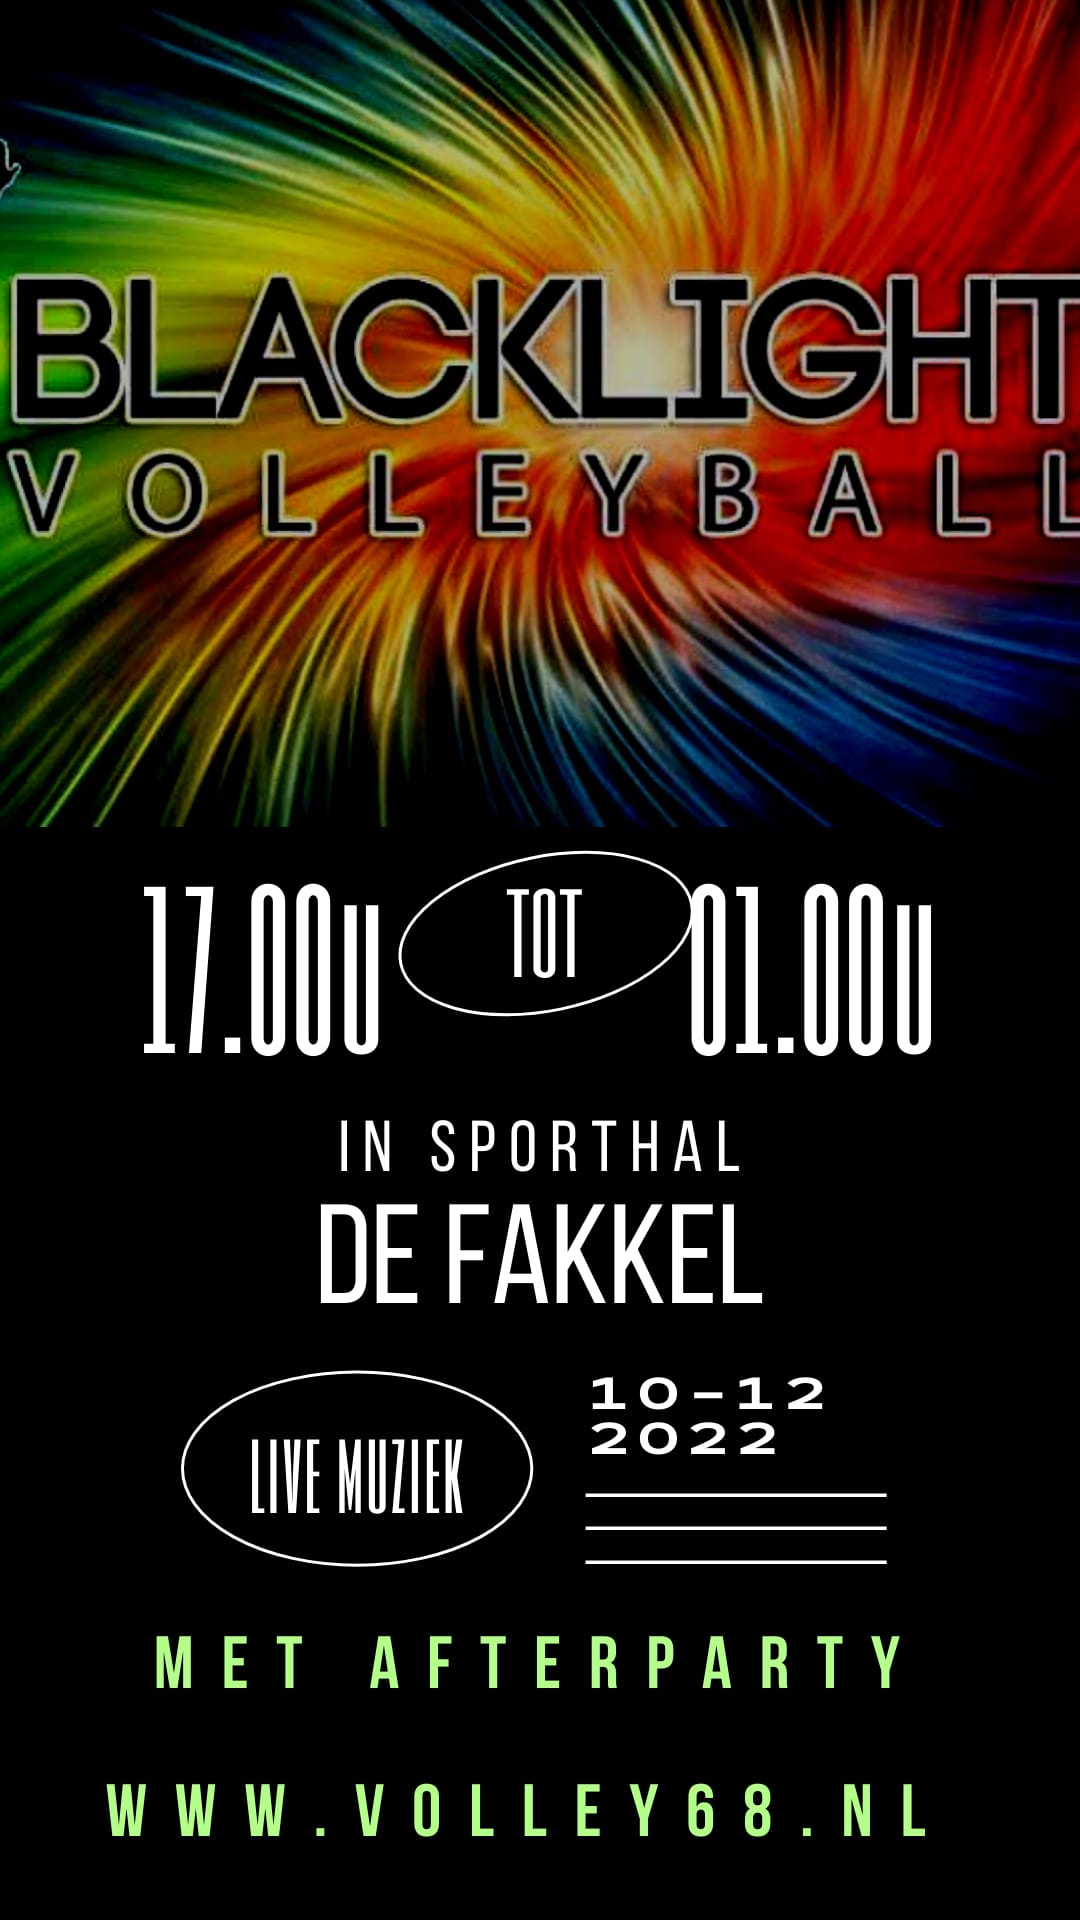 backlight volleybal poster